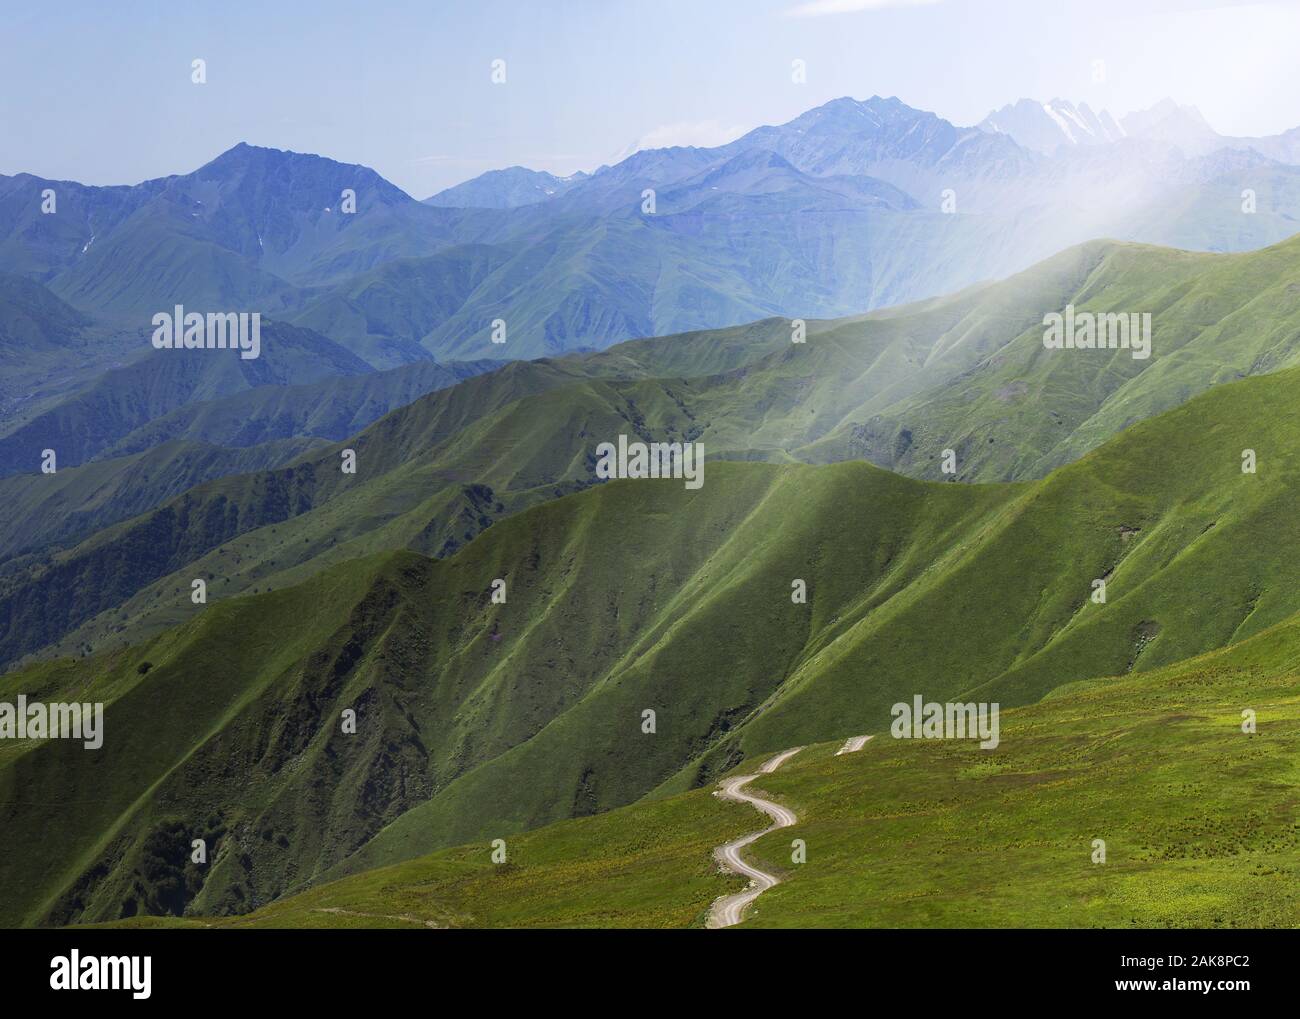 A majestic panorama of a rocky mountain range with forest-covered slopes of mountains in the foreground. A country road stretching into the distance Stock Photo